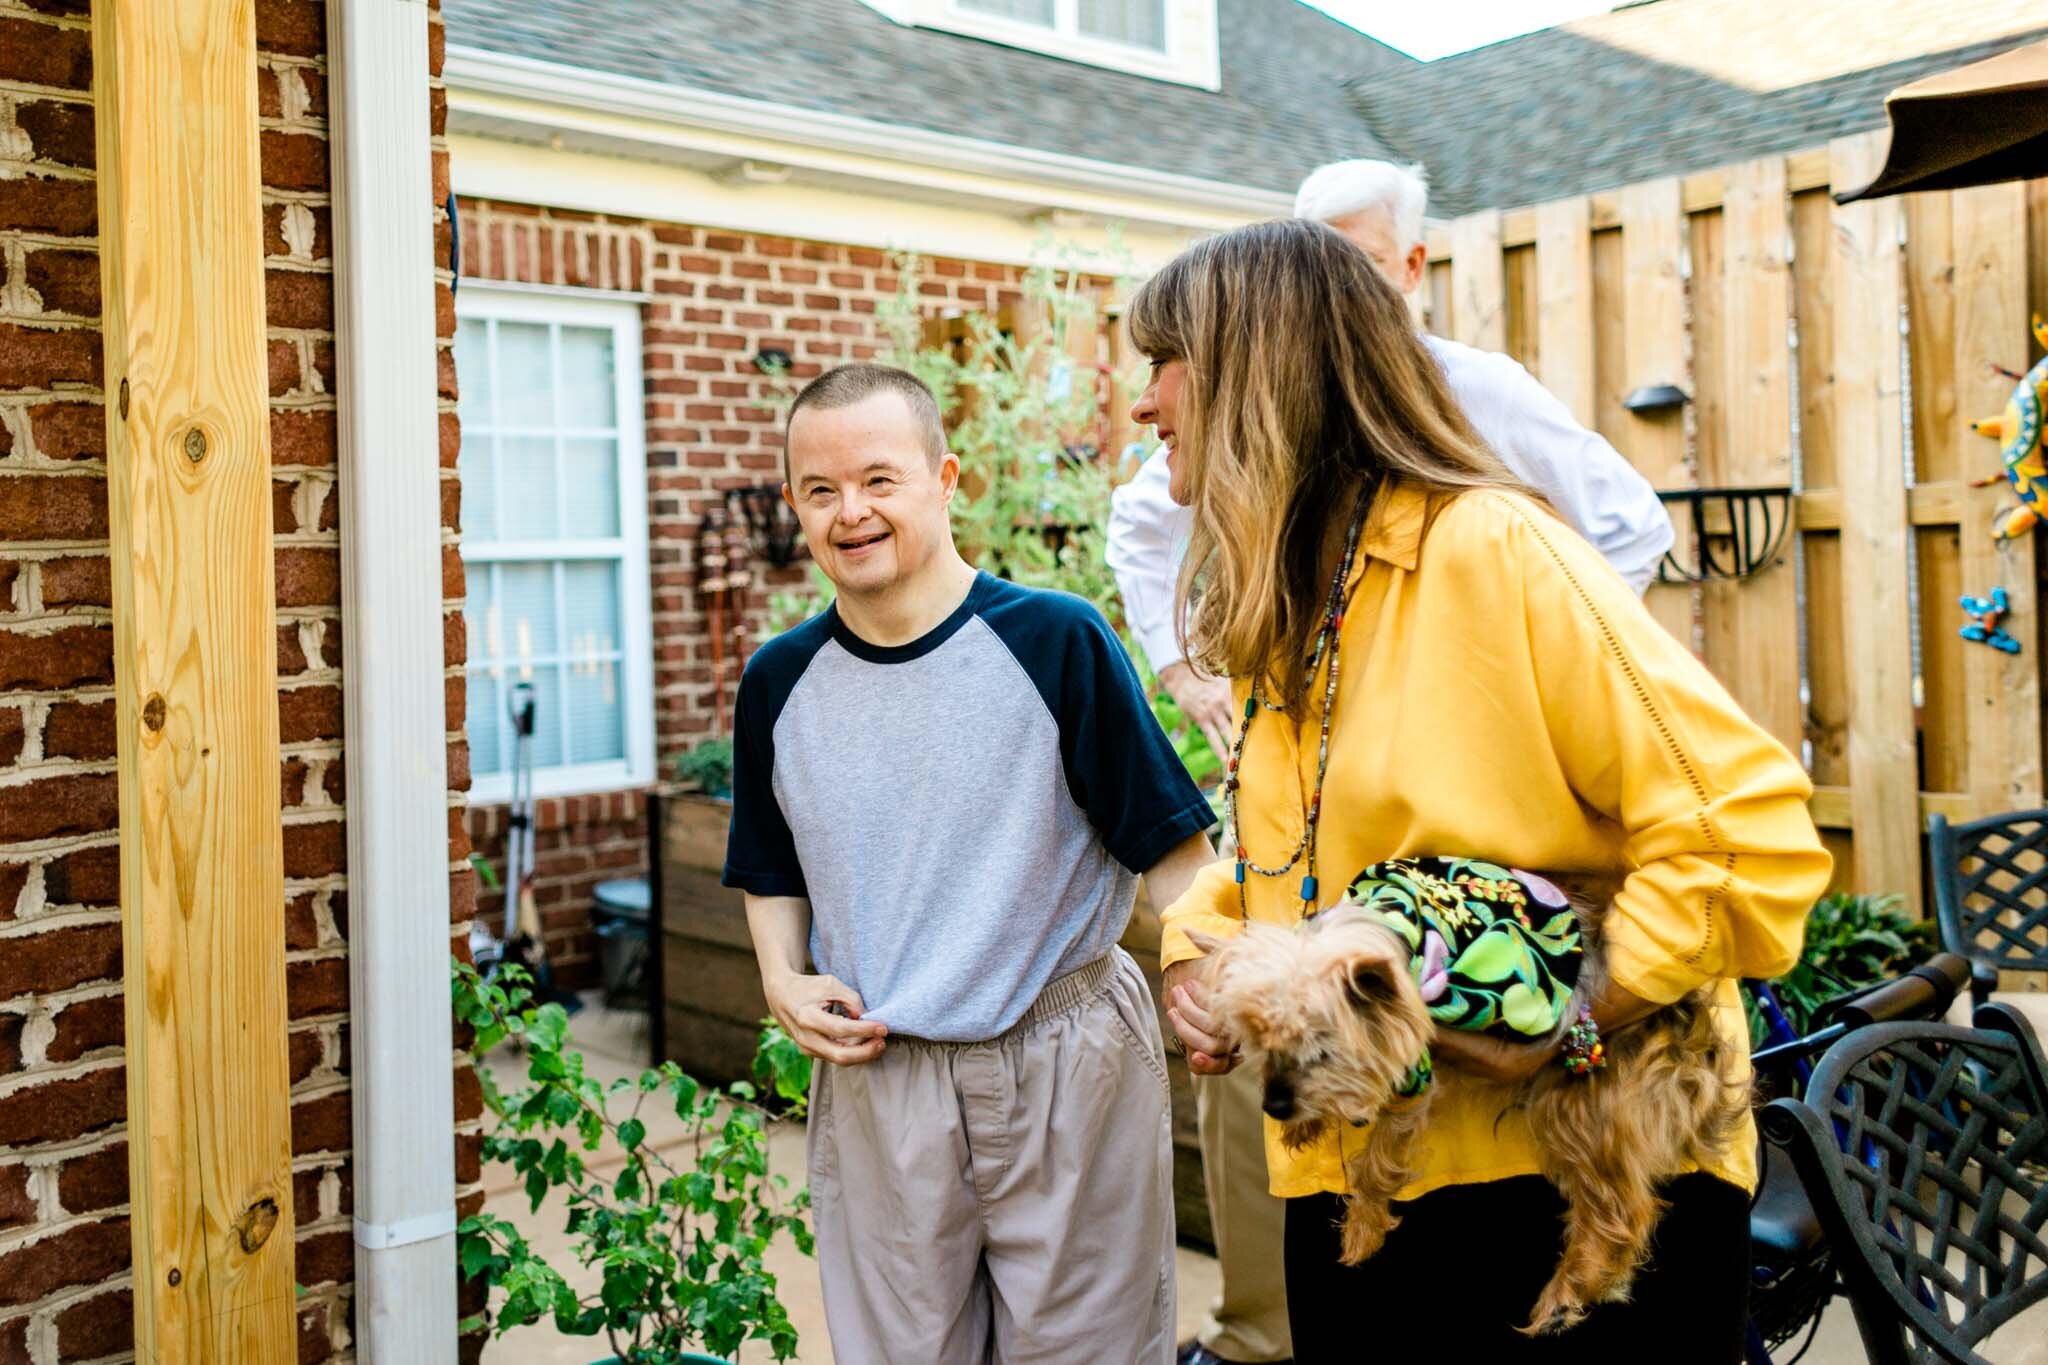 Raleigh Family Photographer | By G. Lin Photography | Man with down syndrome laughing and smiling